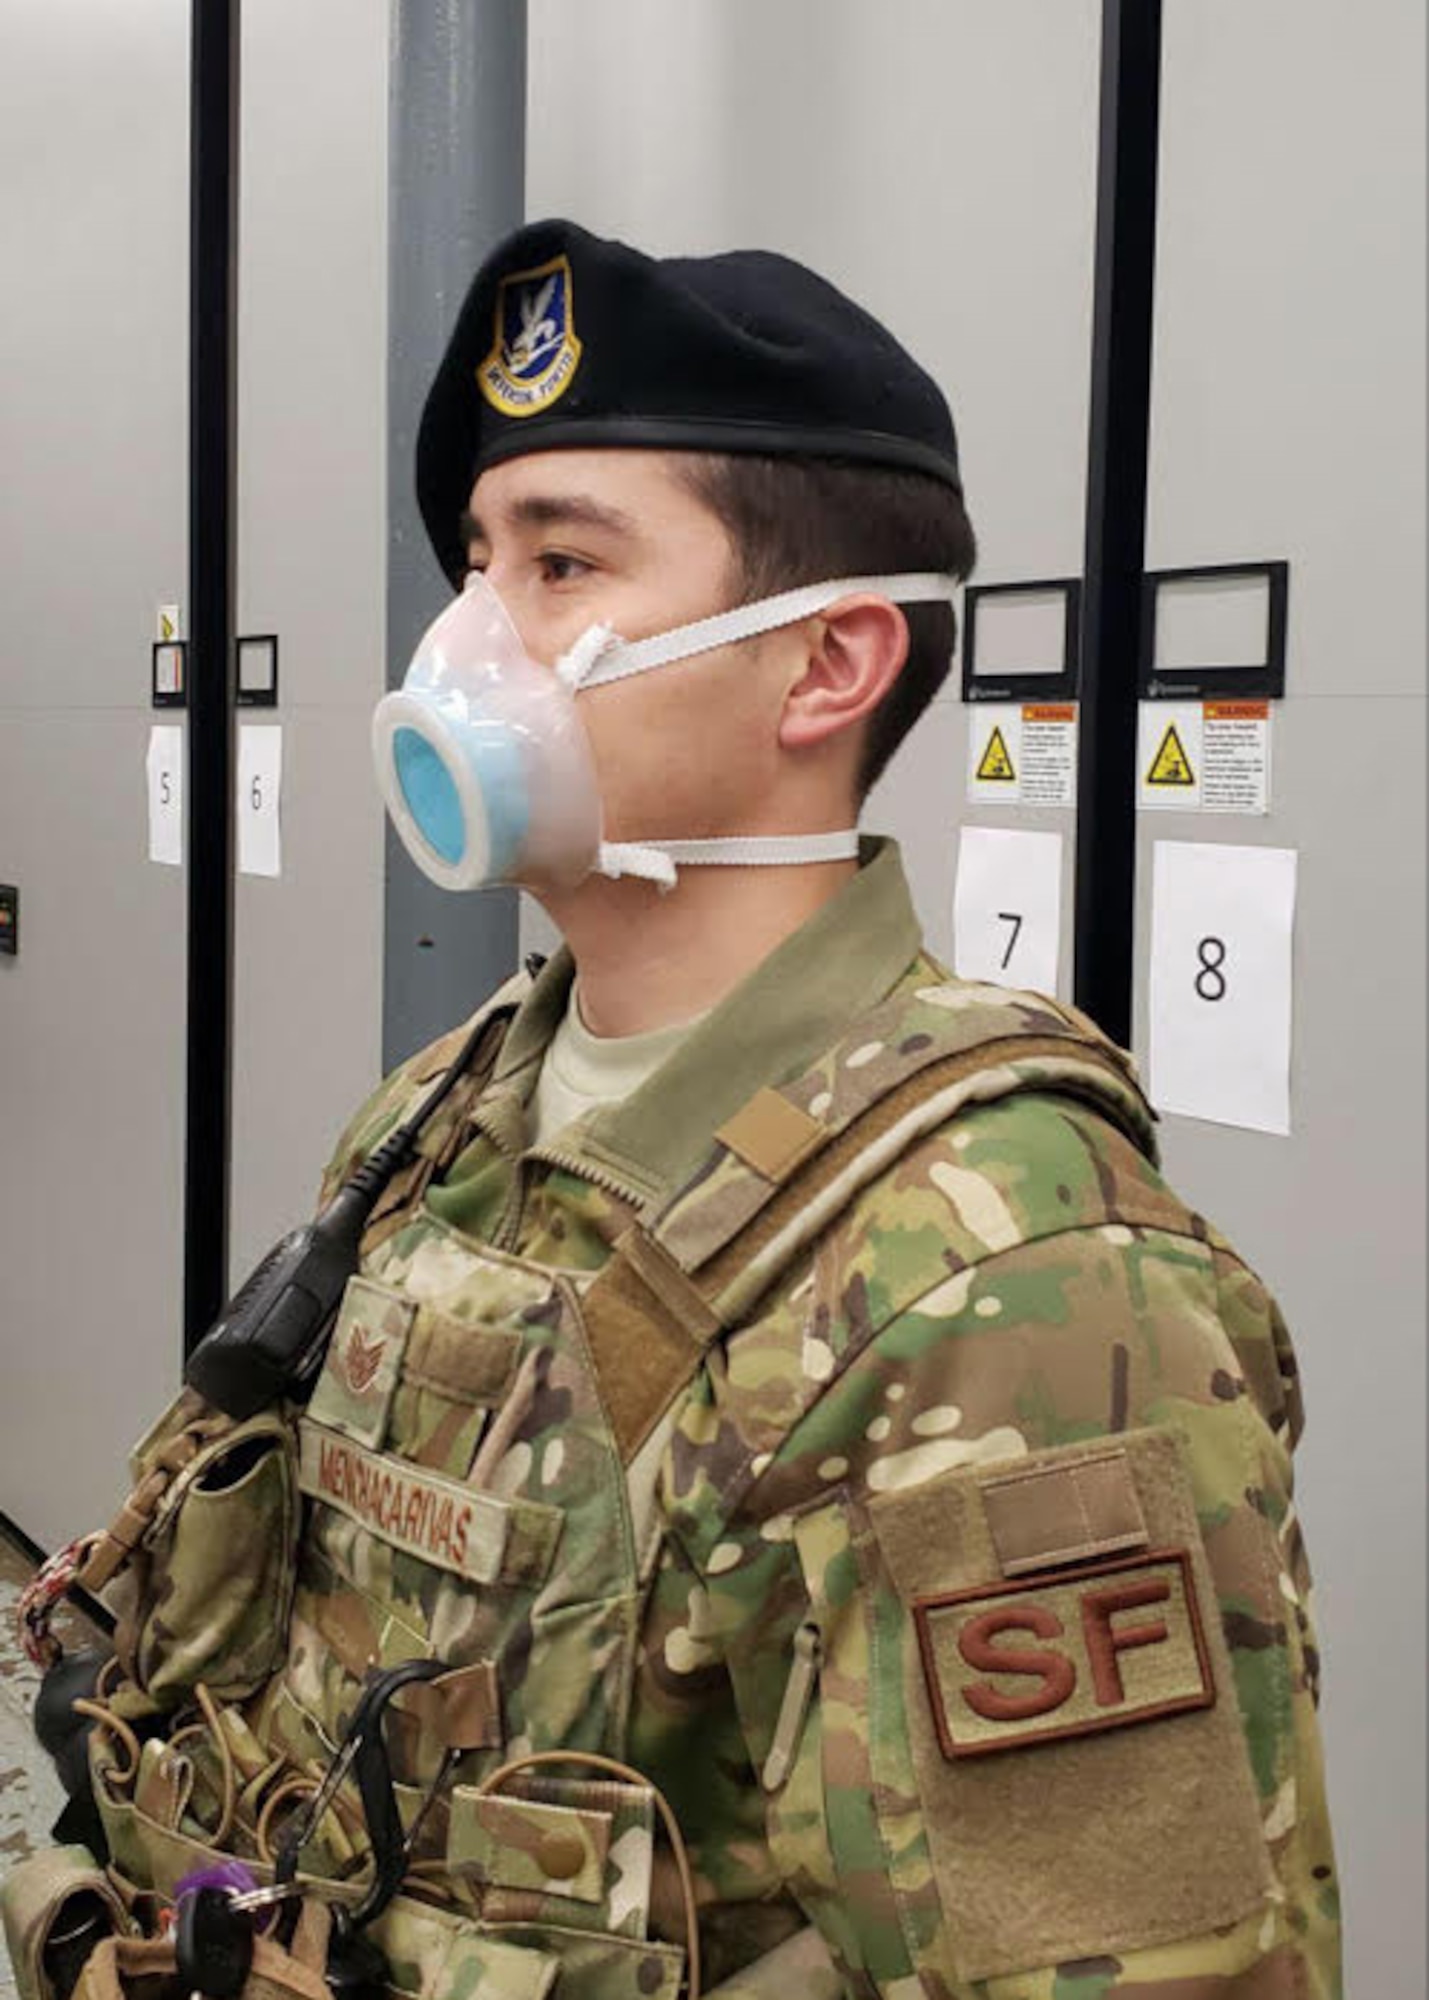 An 11th Security Support Squadron member wears a mask received through a pilot initiative called the Air Force Rapid Agile Manufacturing Platform at Joint Base Andrews, Md., May 15, 2020. The framework is designed to keep the Air Force supply system independent of the civilian medical market. (U.S. Air Force courtesy photo)